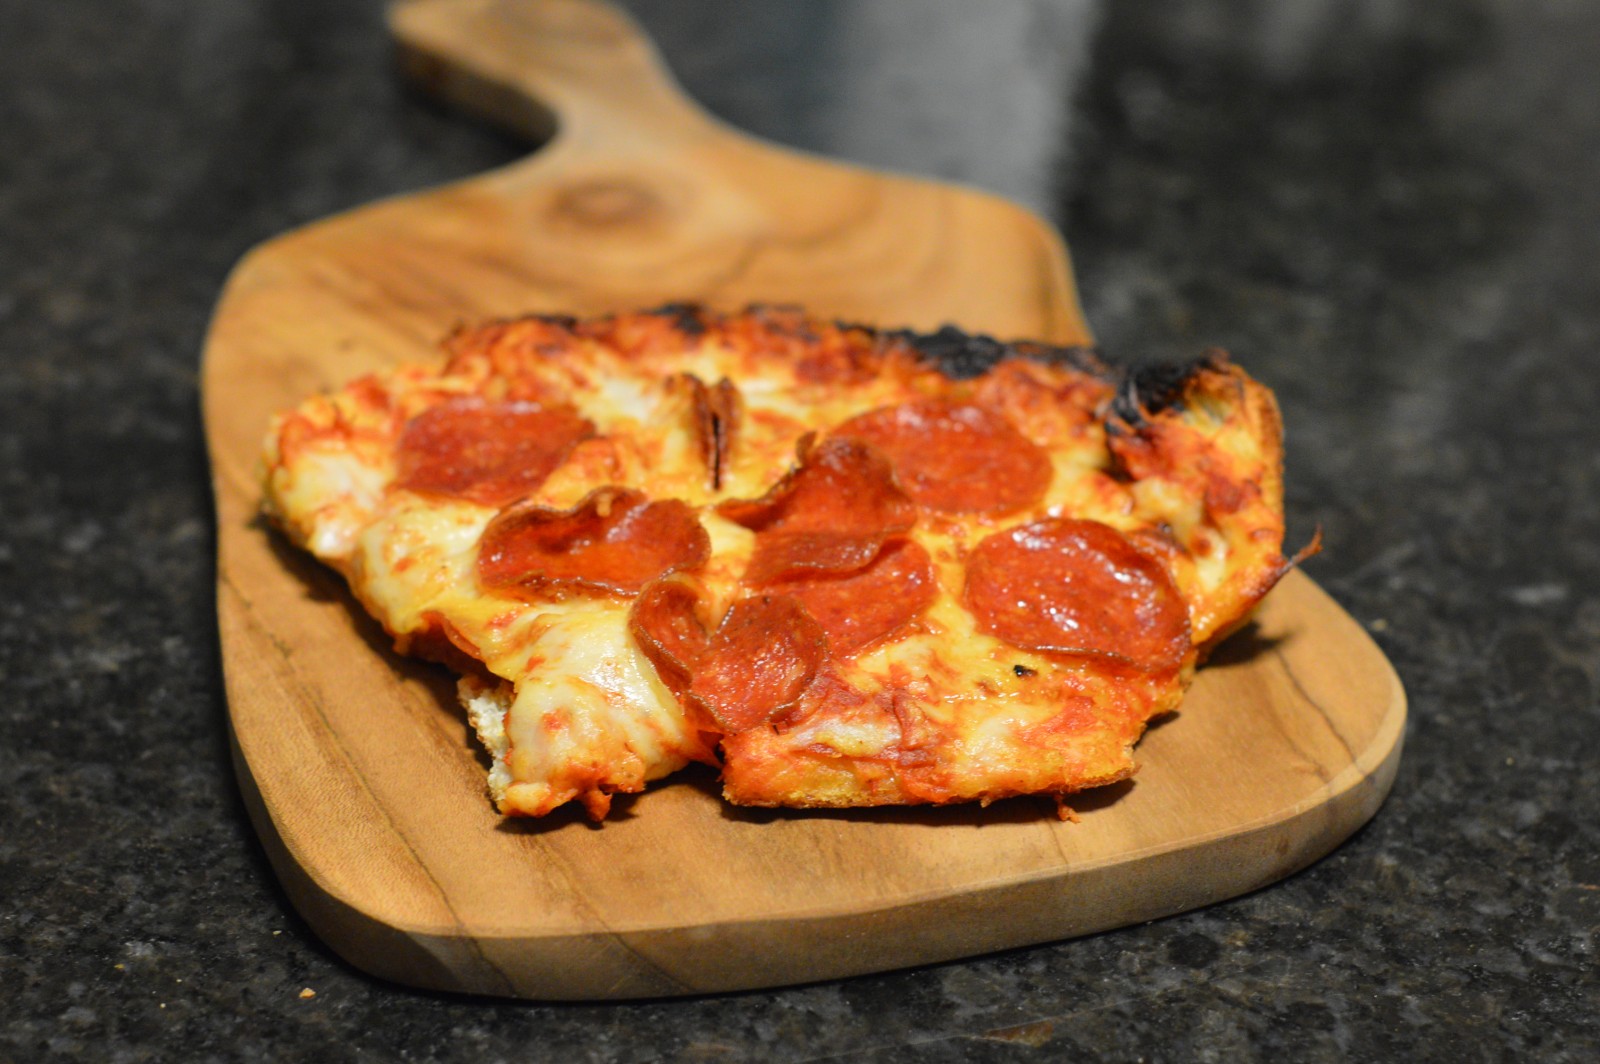 Tip To Reheat - Reheating Leftover Pizza